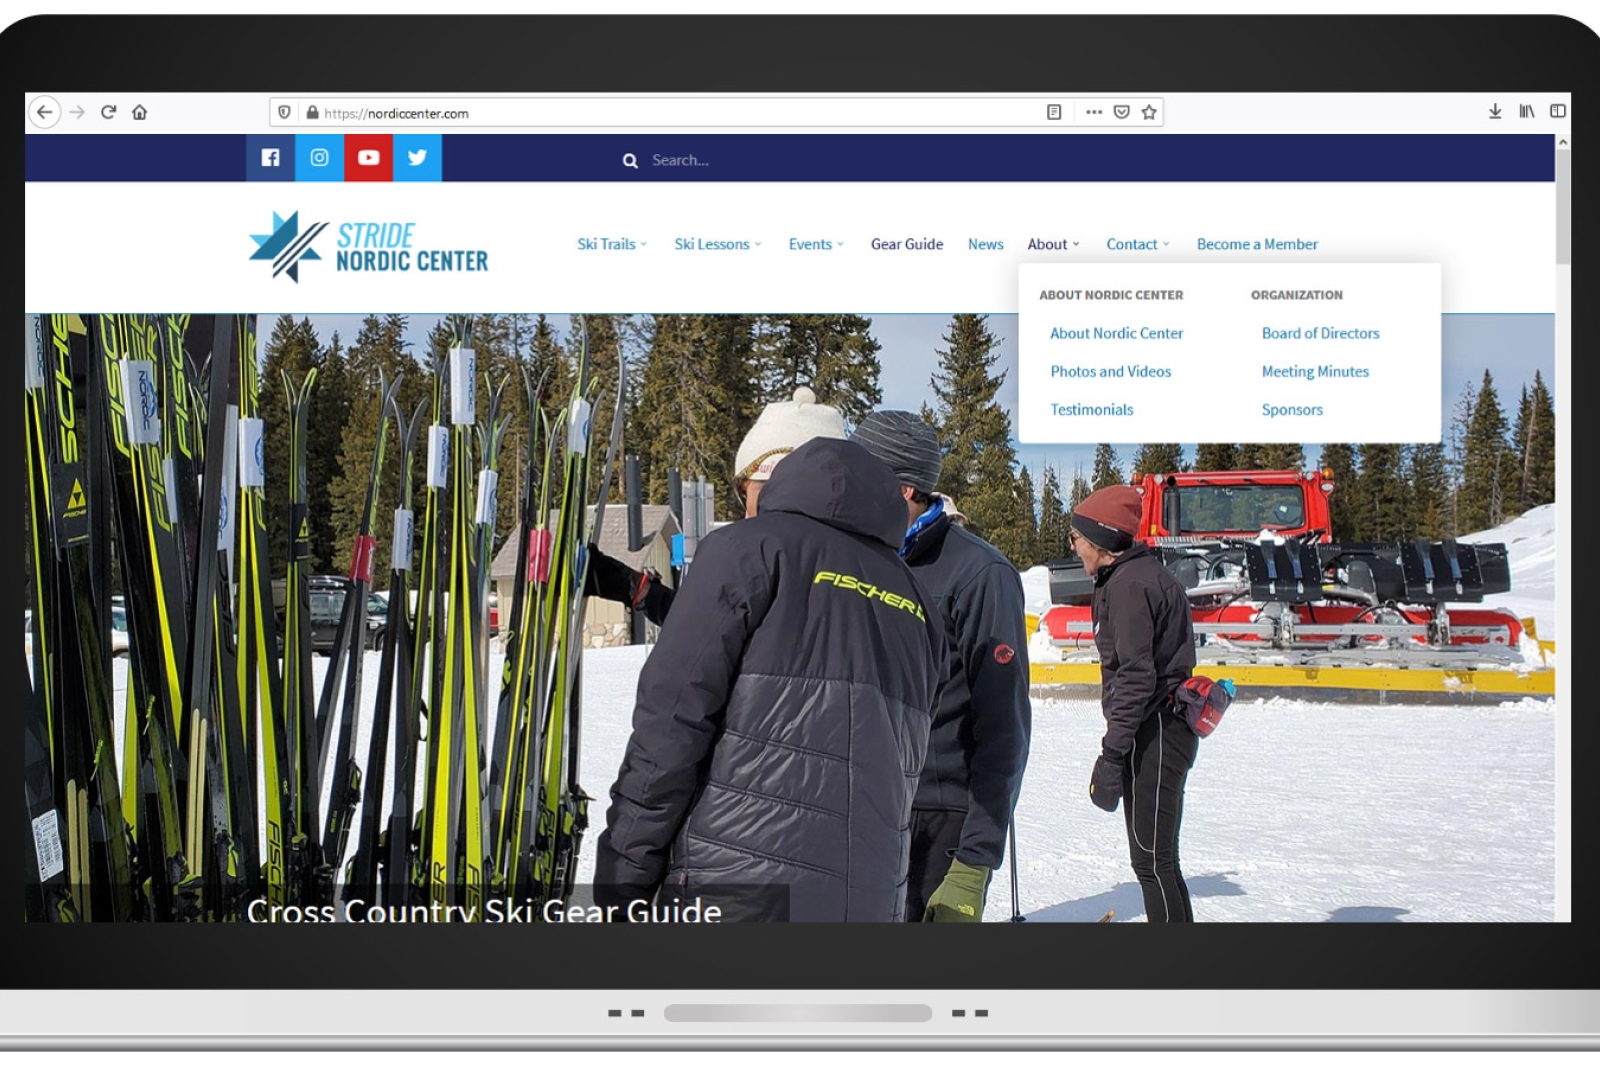 An example of a multi-column mega menu that powers the Nordic Center's website template.